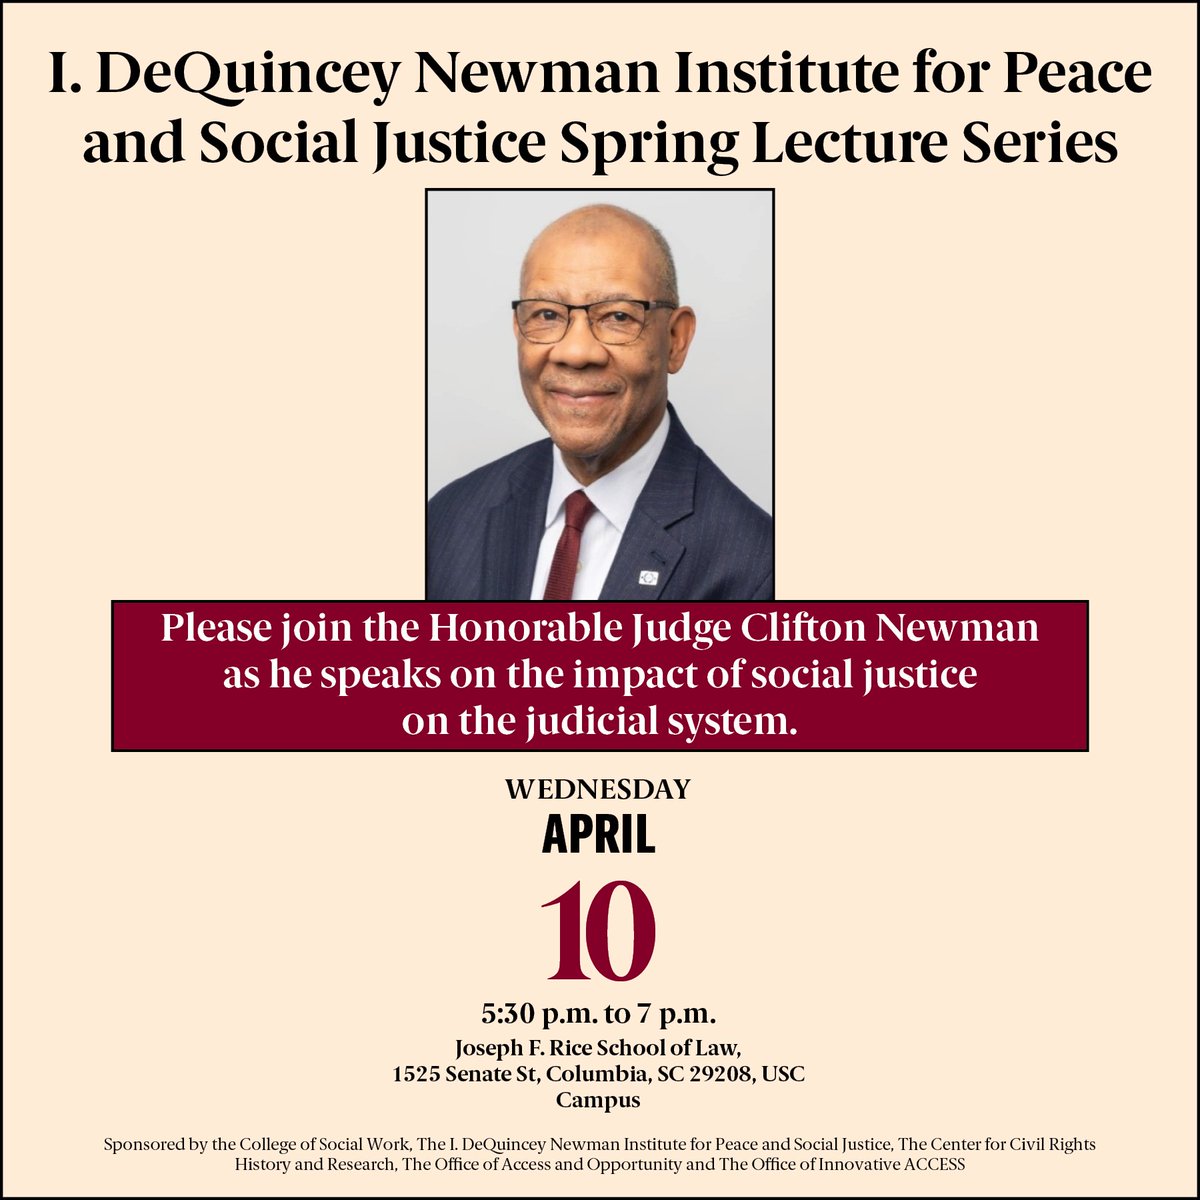 Join us for our Newman Lecture featuring Judge Clifton Newman on Apr. 10, 5:30 pm at @UofSCLaw. We extend our gratitude to our generous sponsors - @JustinBamberg, @UofSCCRC, the Law Office of Israel Stone, Jr. and @uofscaccess for their support in making this event possible.